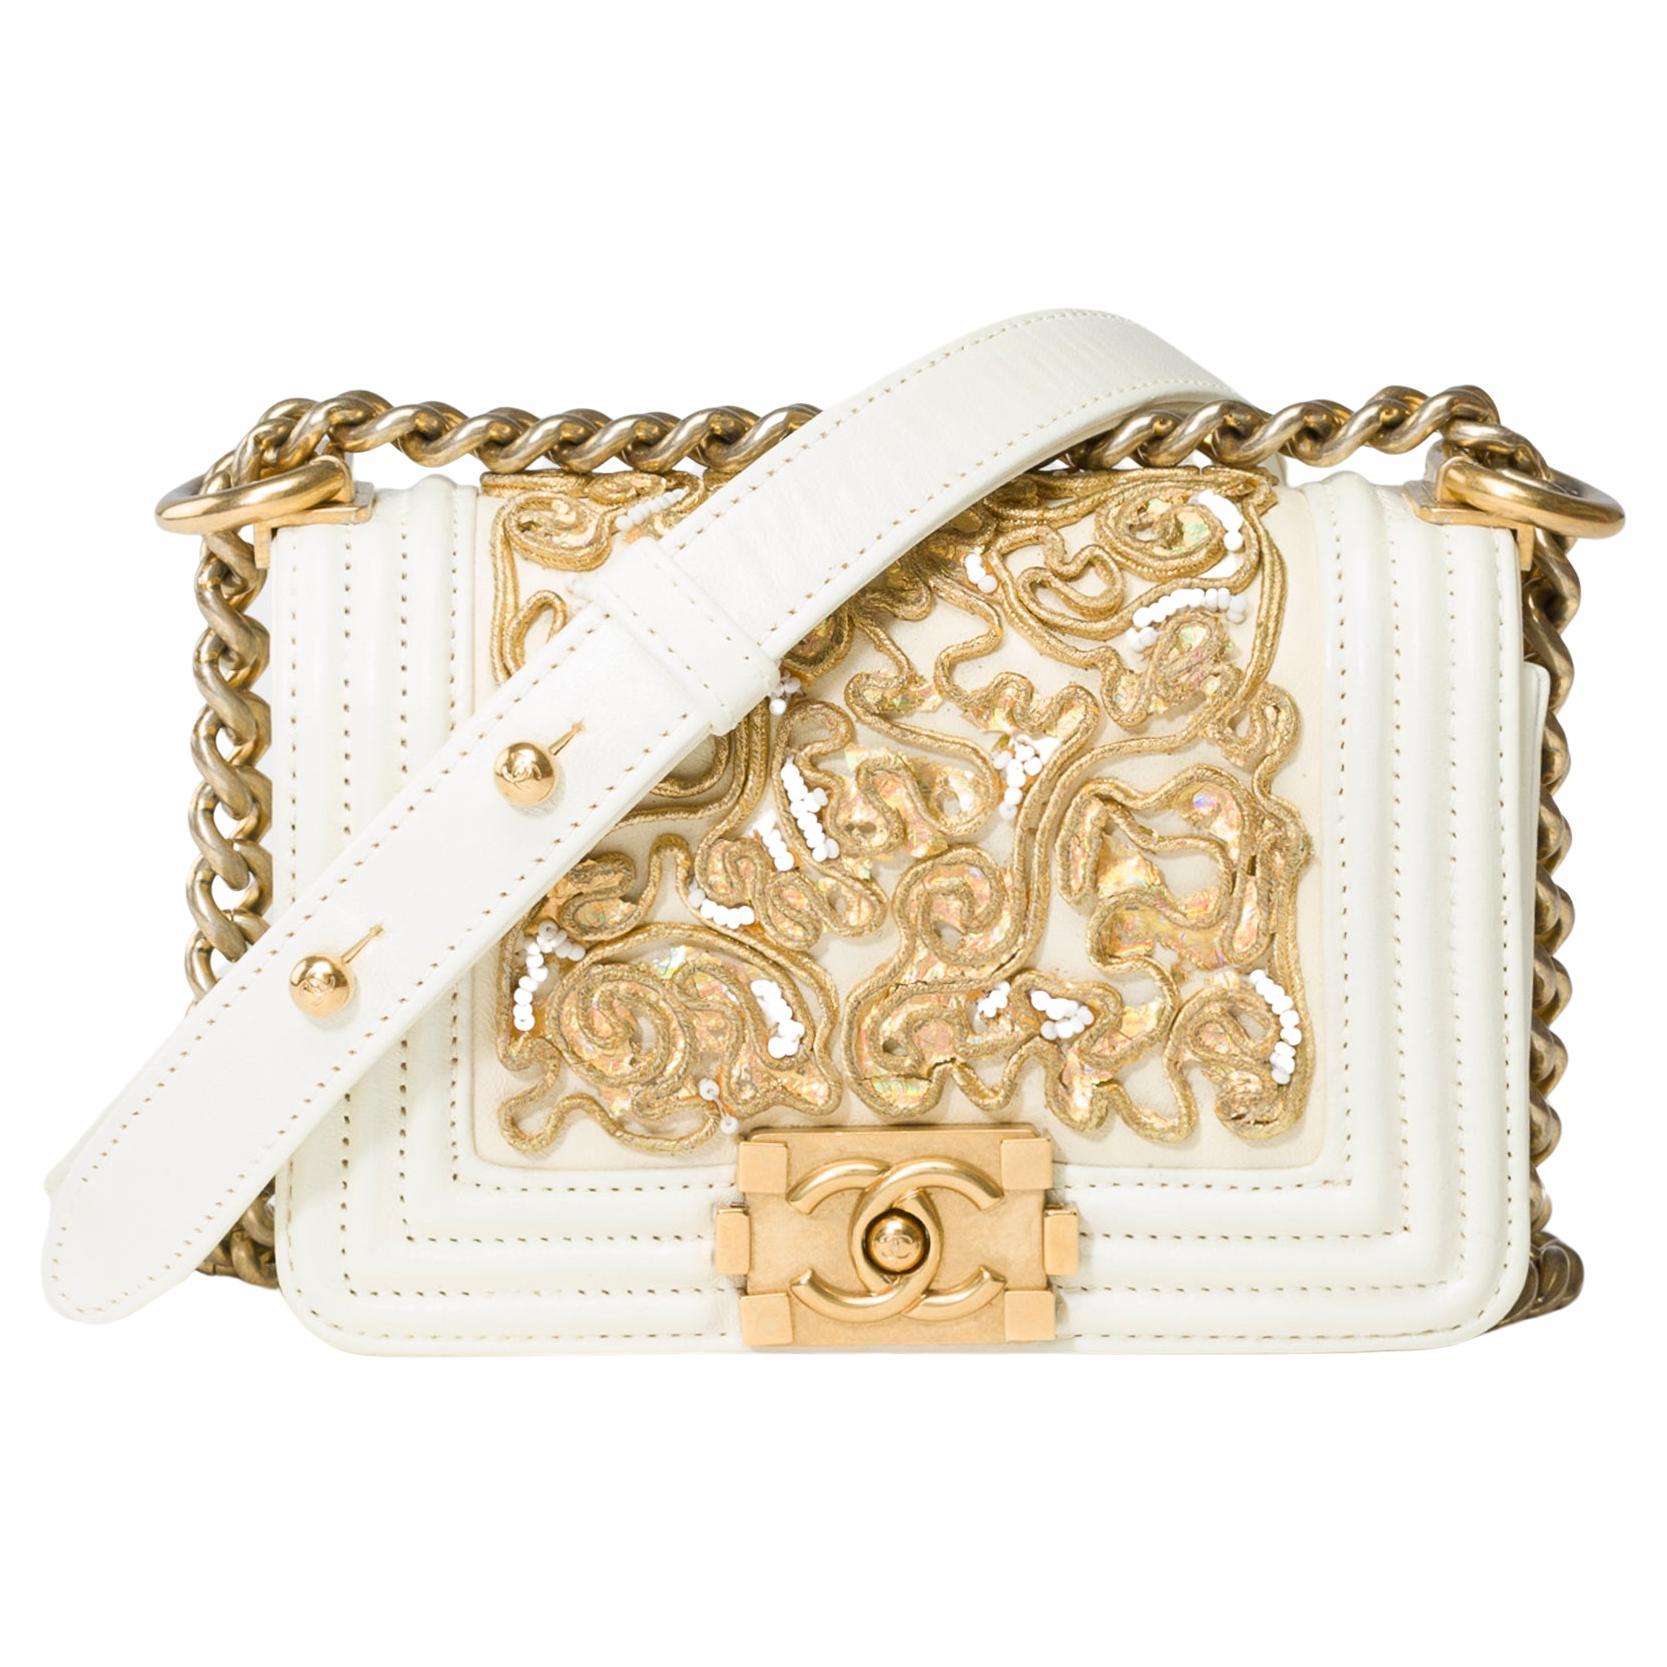 Limited edition Chanel Boy Mini Versailles shoulder bag in ecru leather, MGHW For Sale